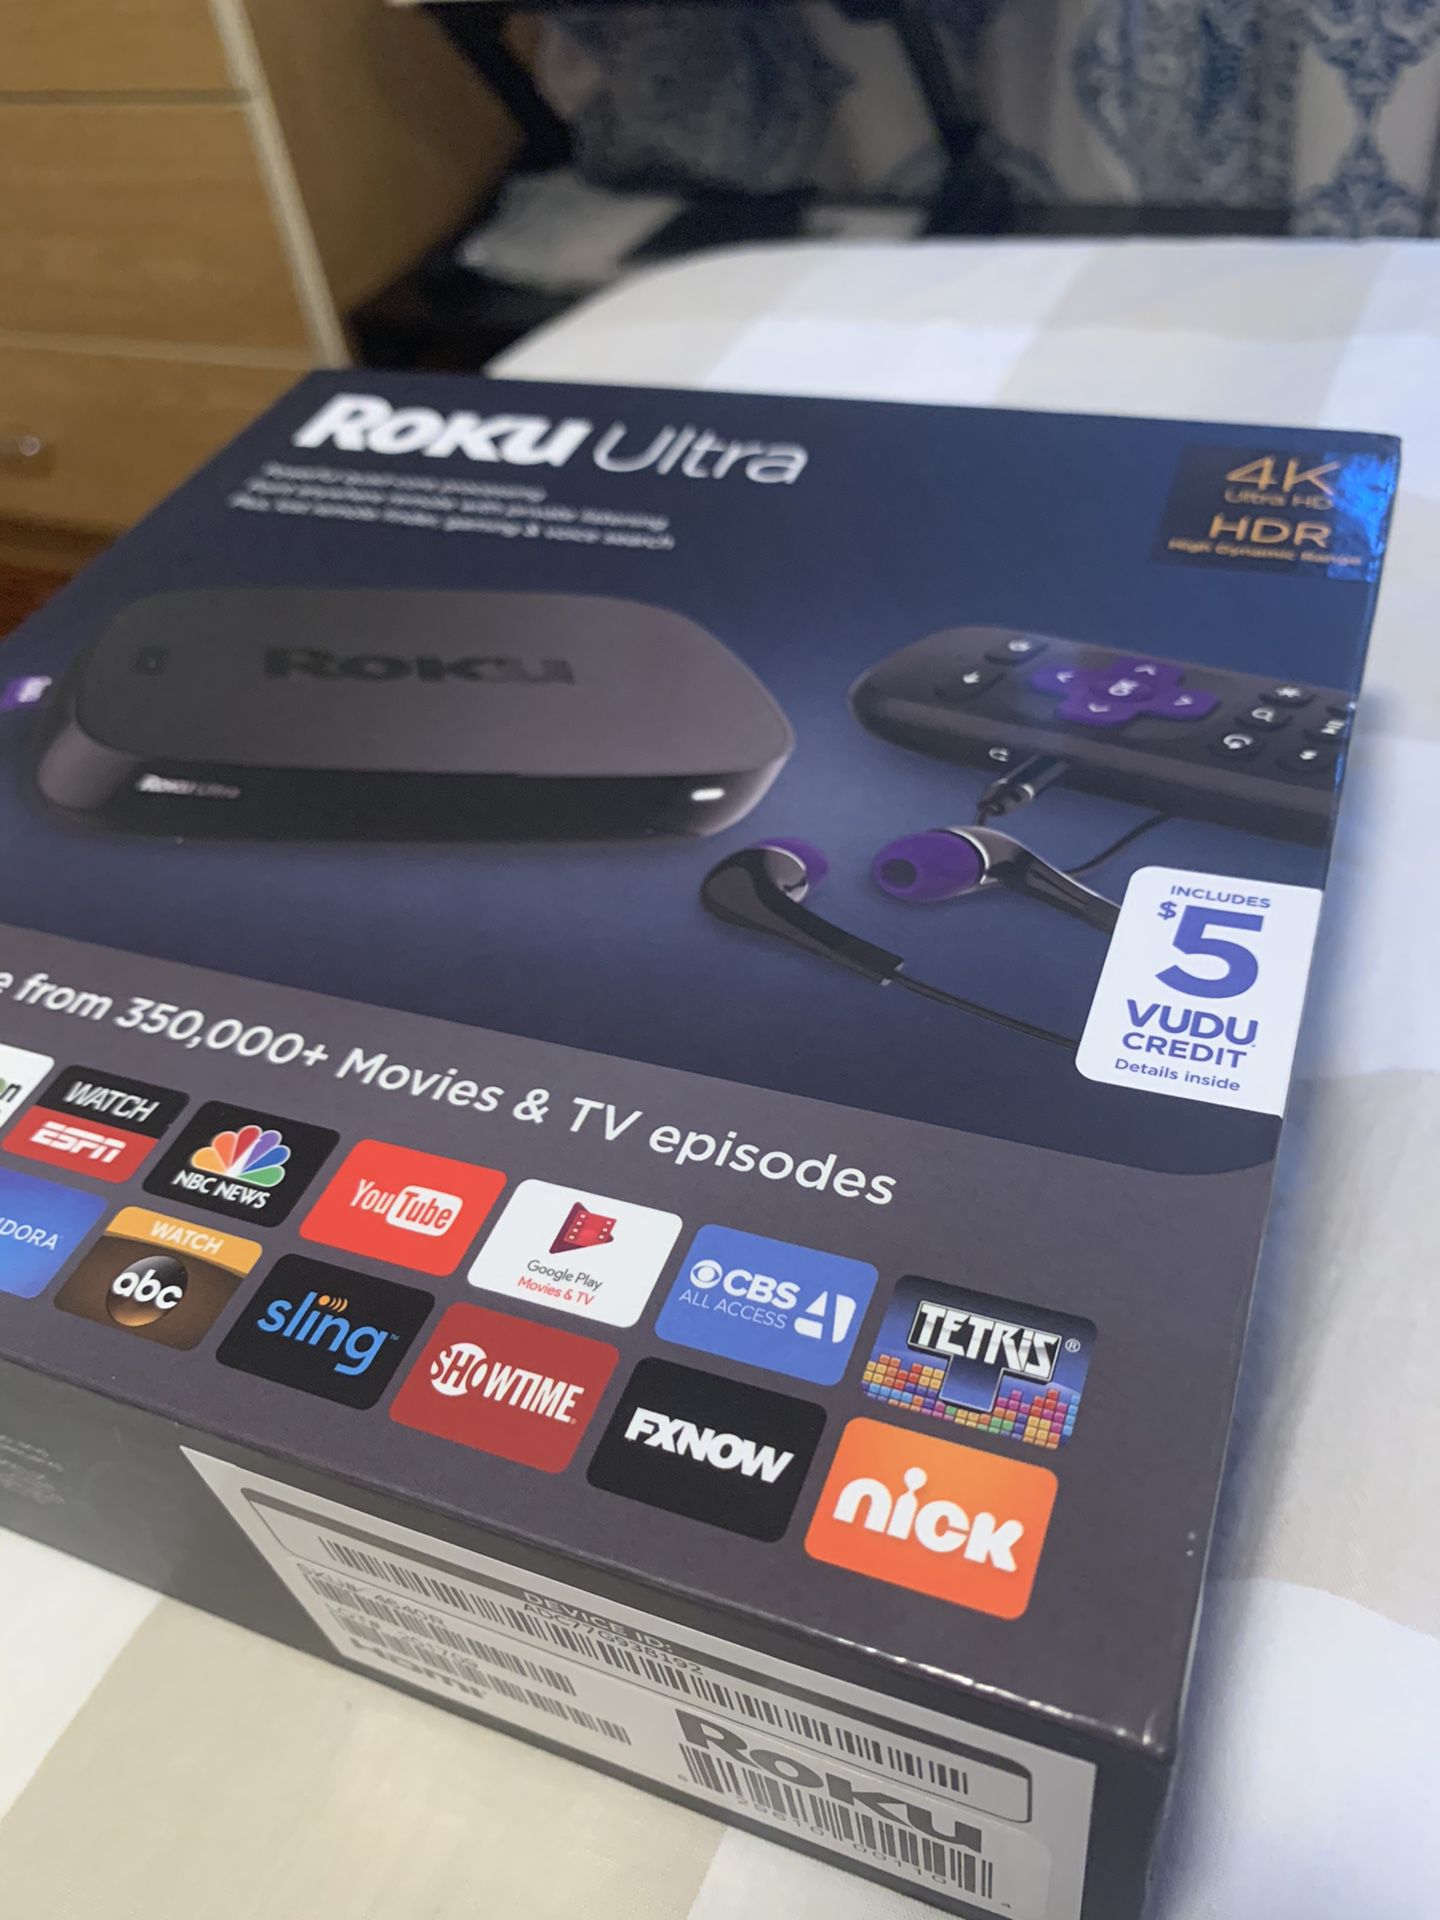 Roku Ultra 4K HDR with headphone jack for private listening